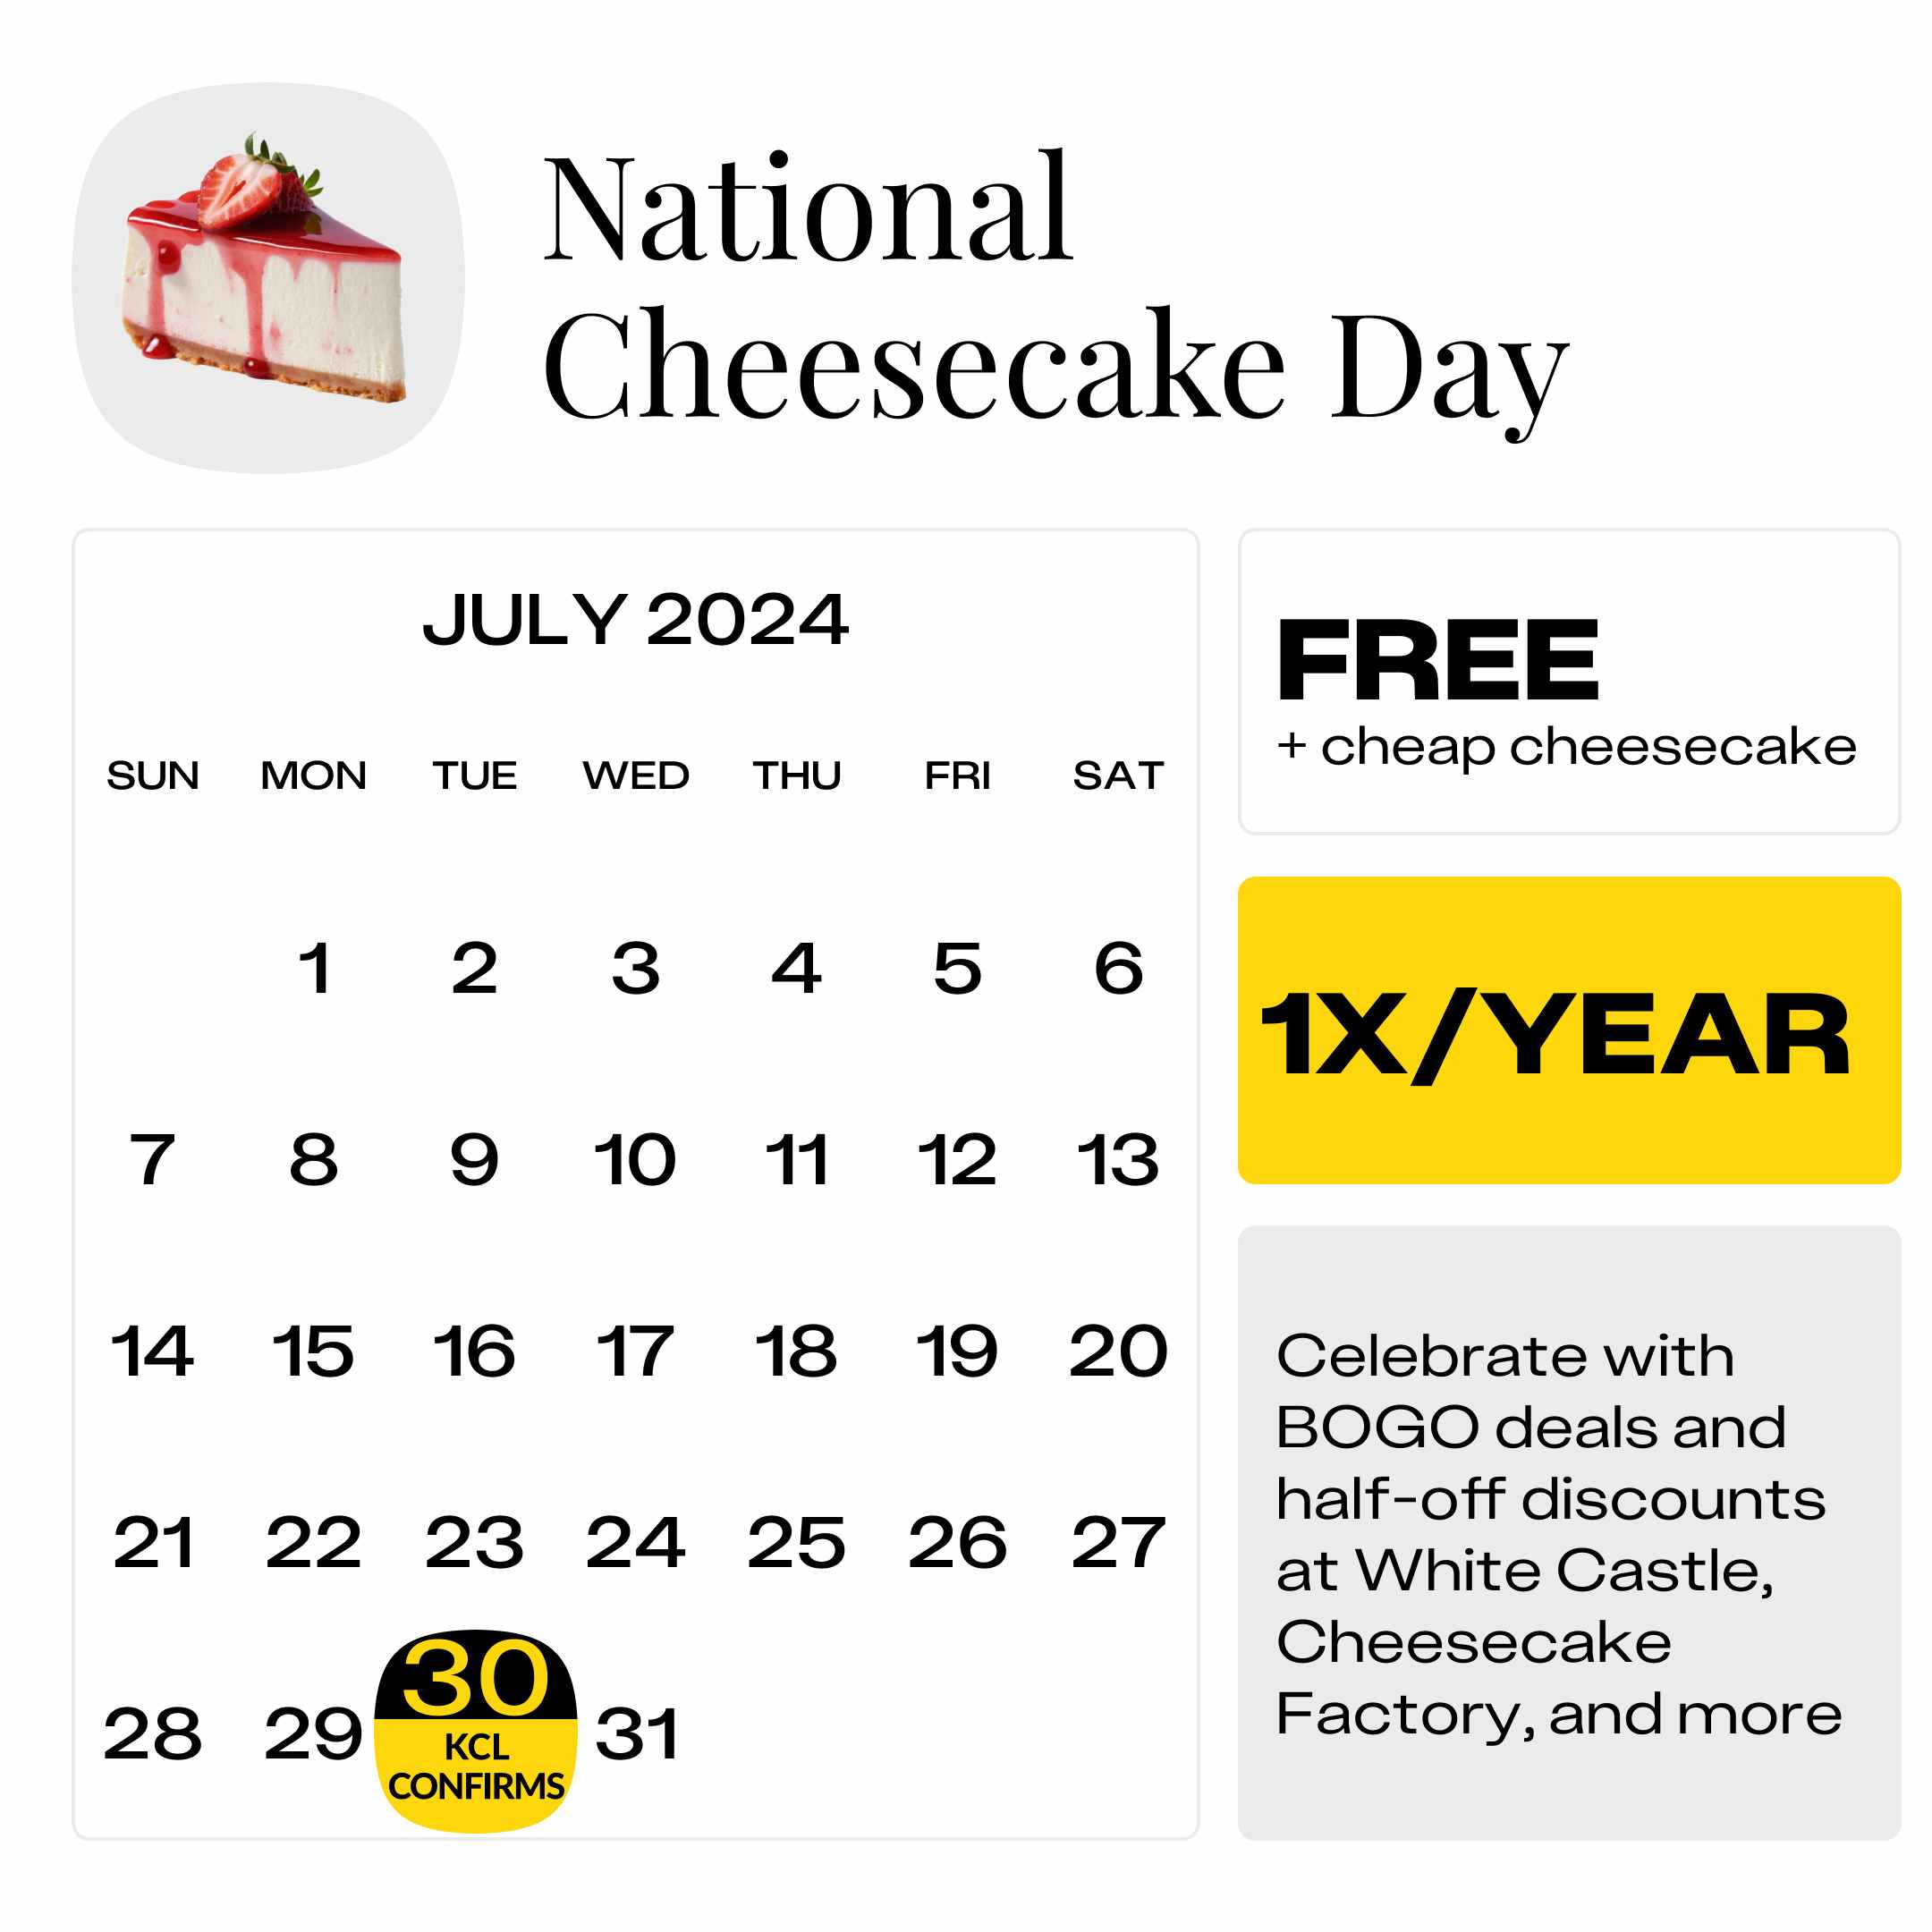 National-Cheesecake-Day-2024-retail-event-calendar-kcl